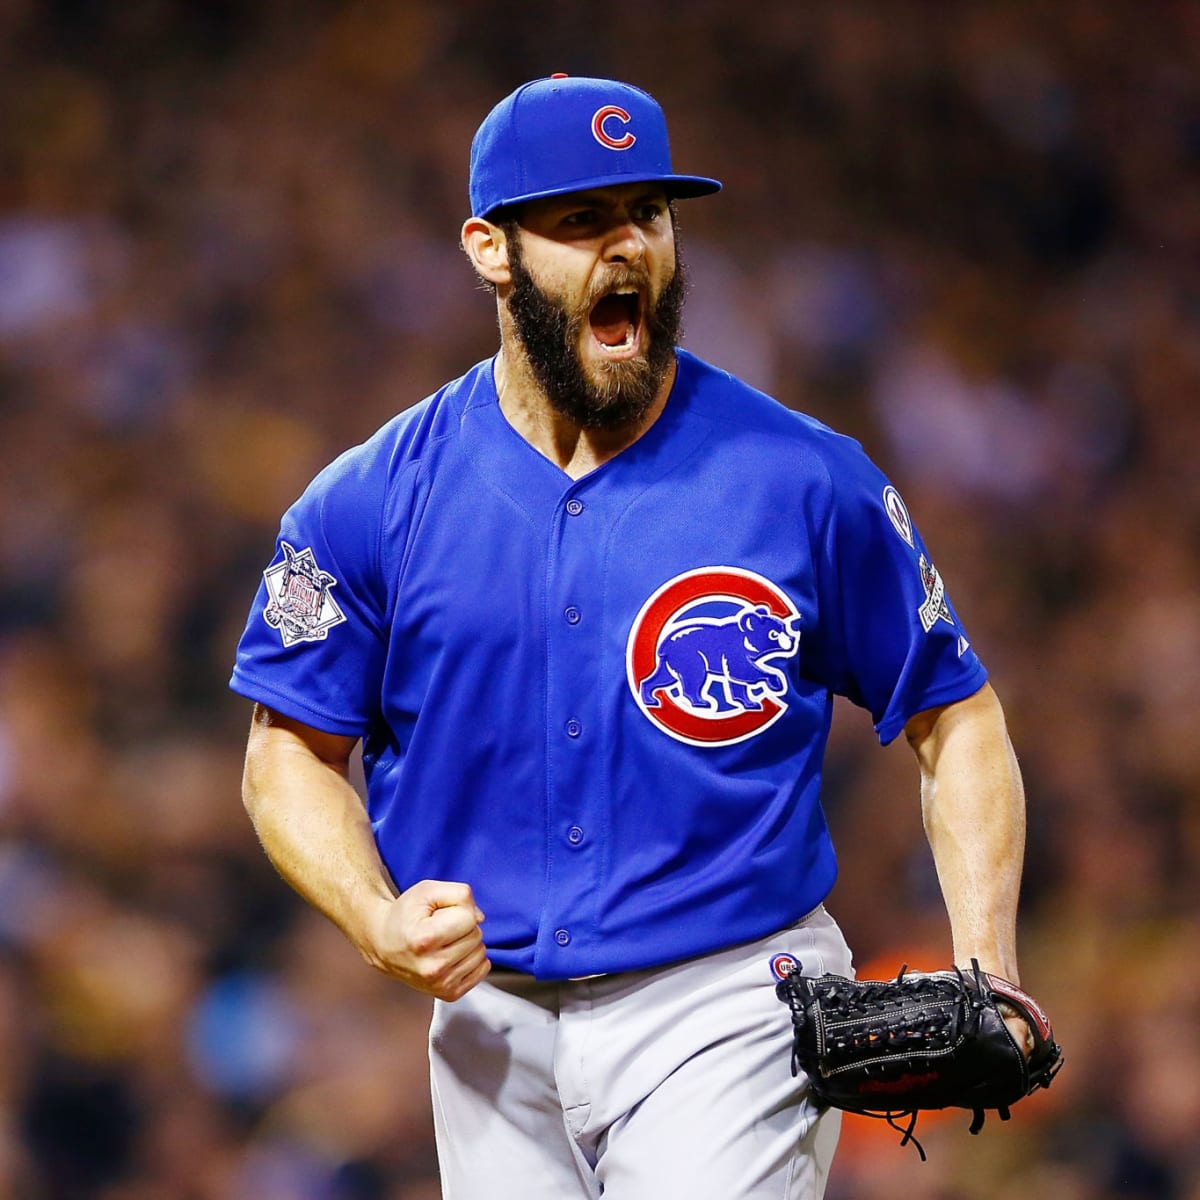 Former Cy Young winner Jake Arrieta announces his retirement